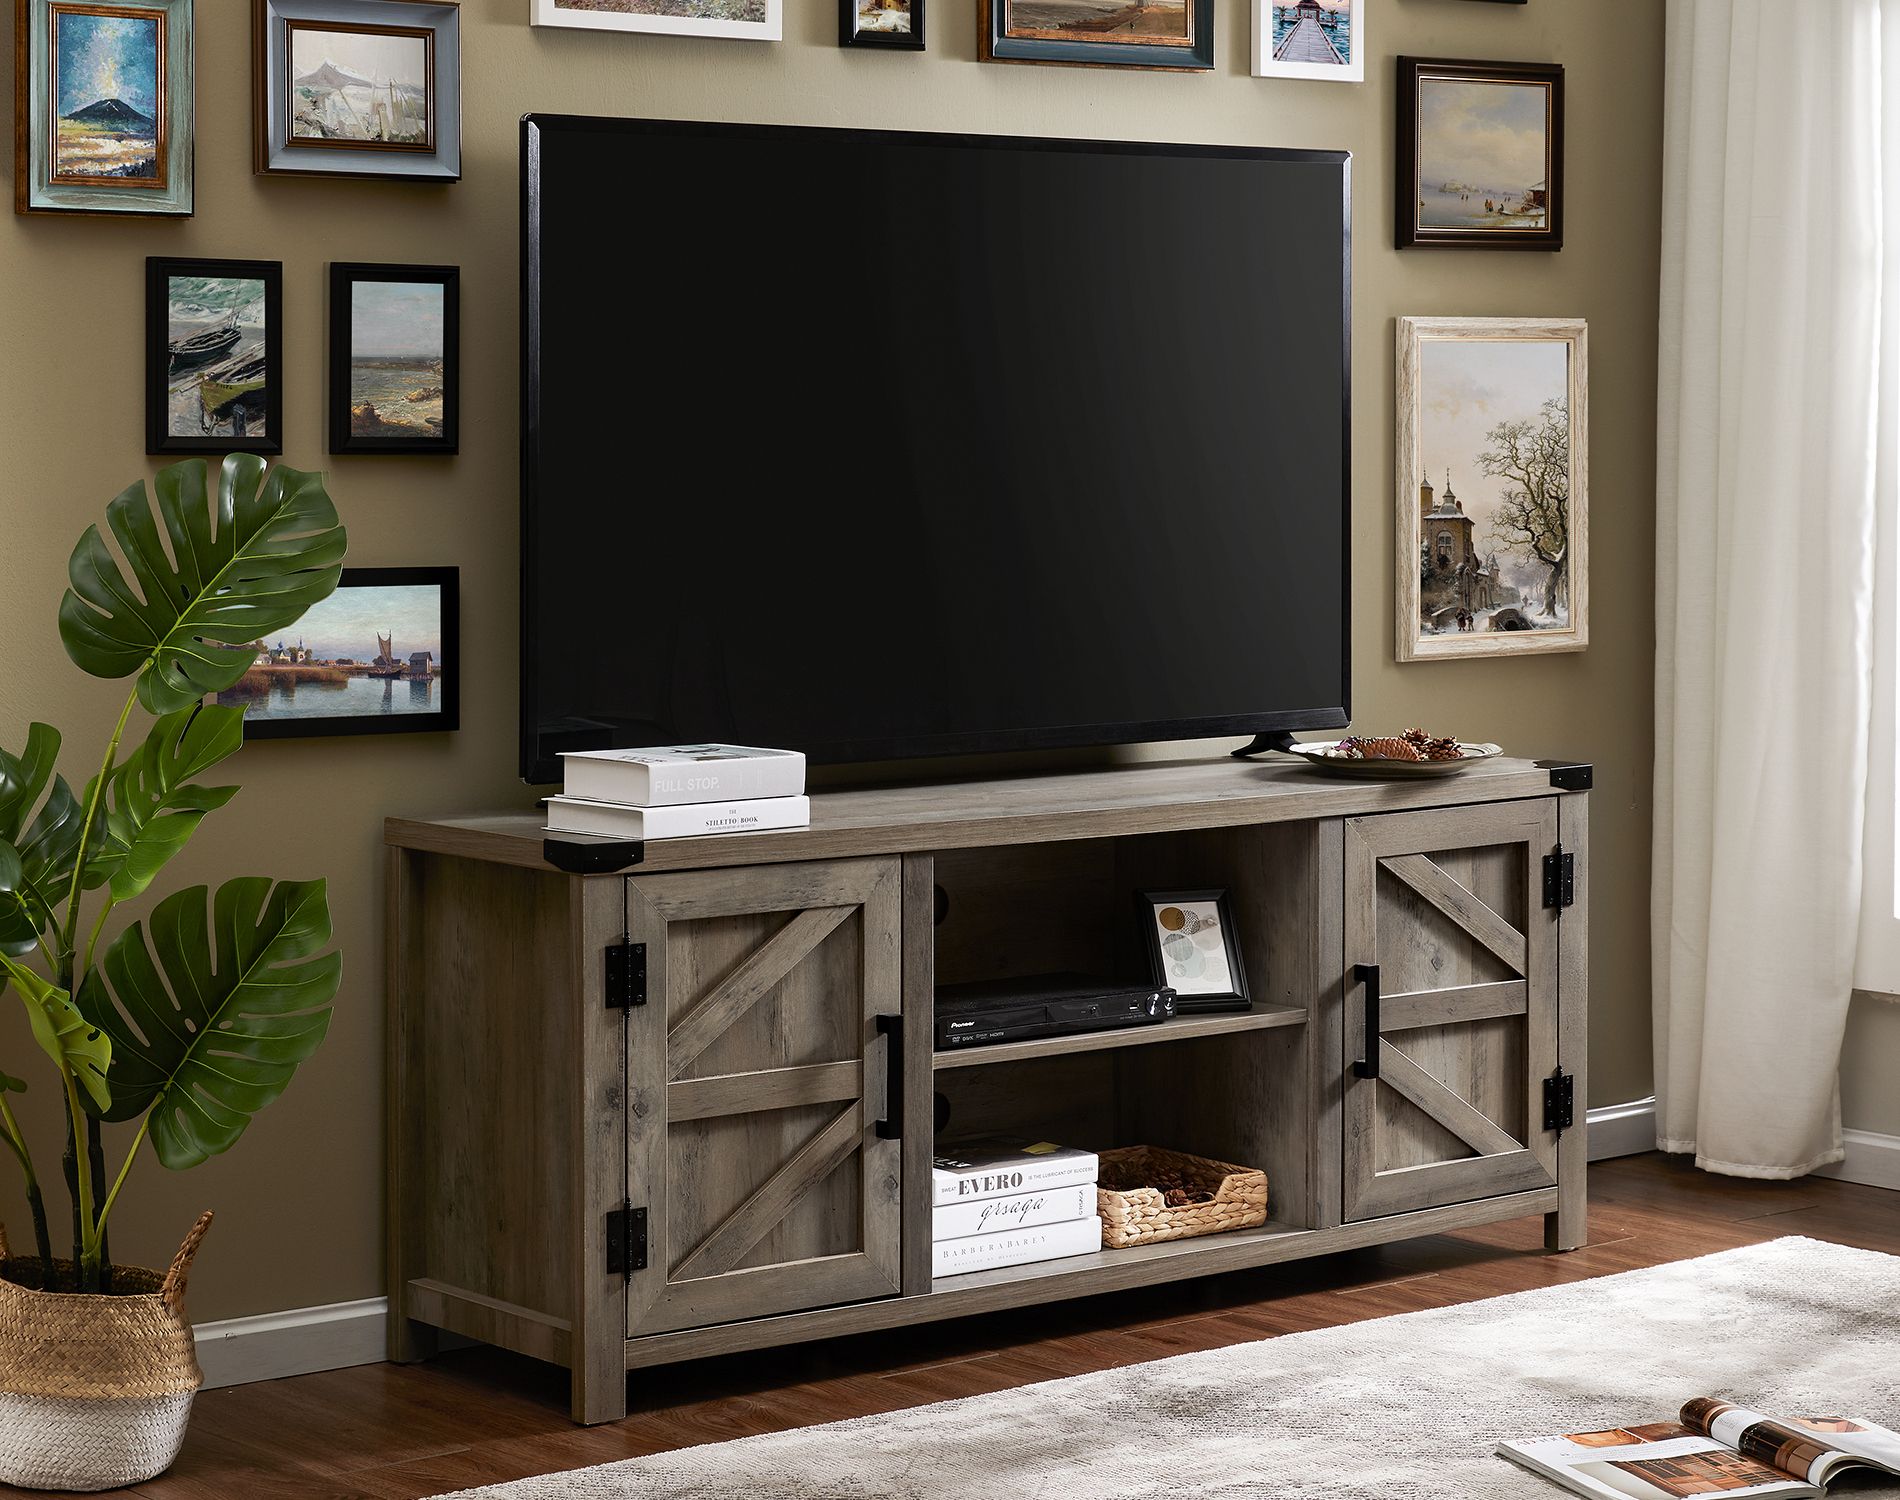 Fitueyes Farmhouse Barn Door Wood Tv Stands For 70 Inch In Tv Stands For 70 Flat Screen (View 3 of 15)